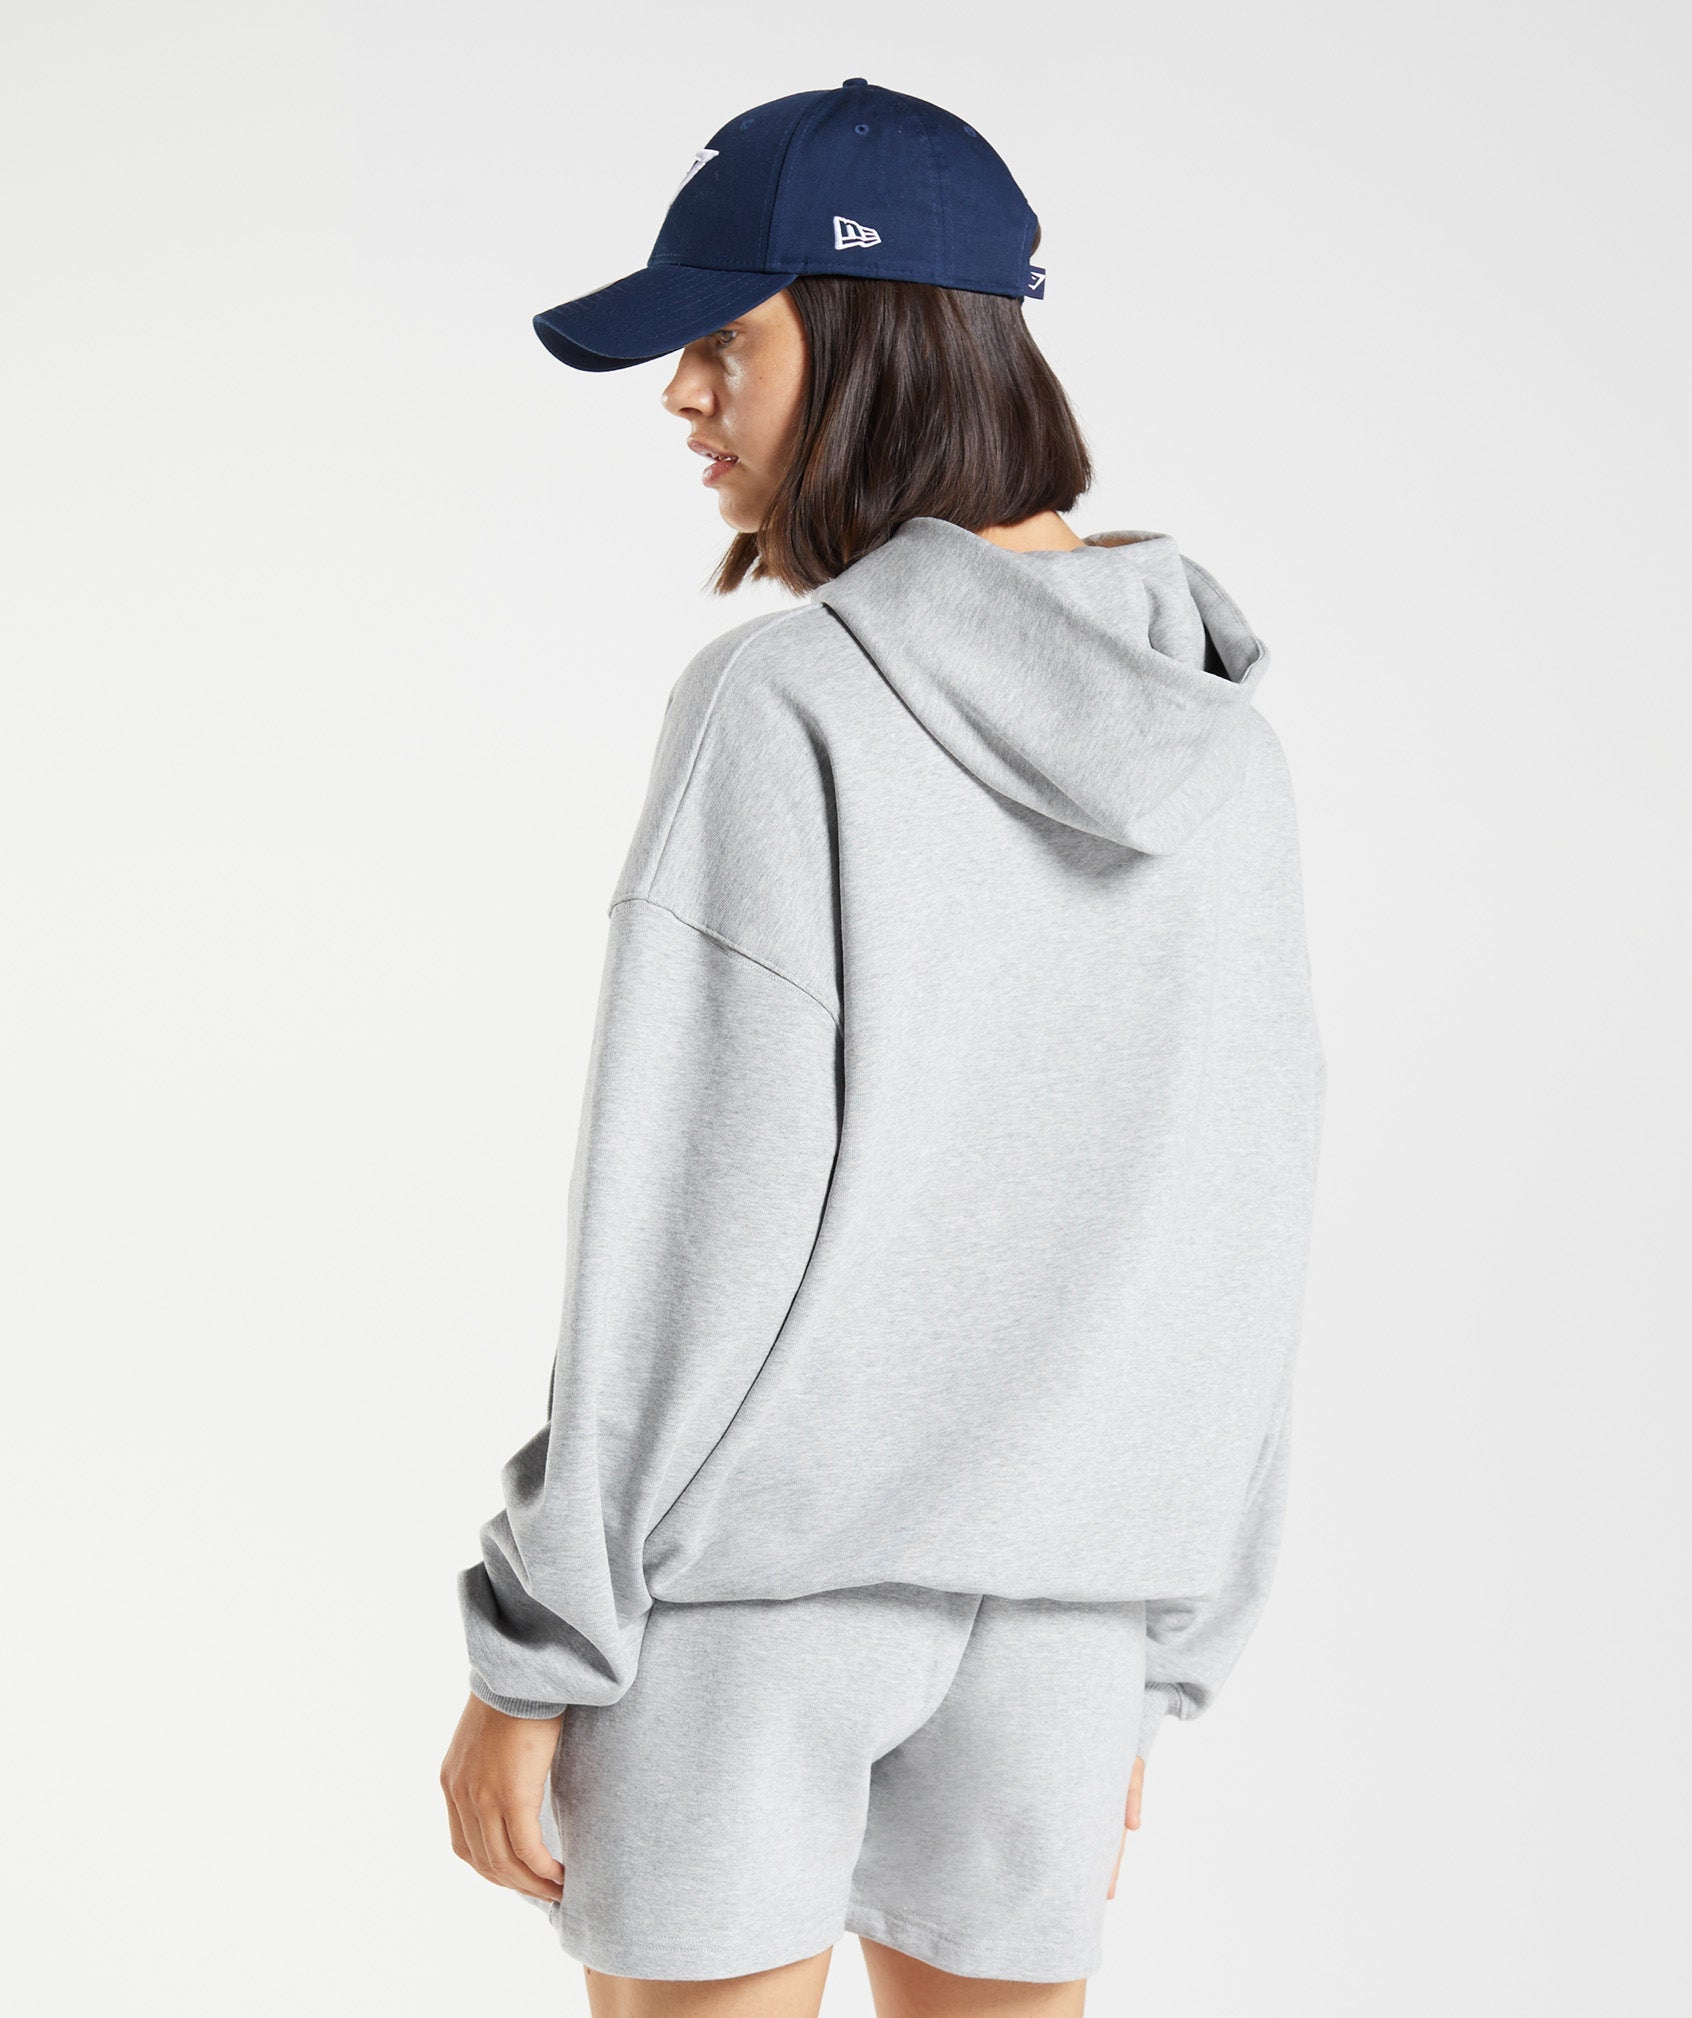 Rest Day Sweats Hoodie in Light Grey Core Marl - view 2